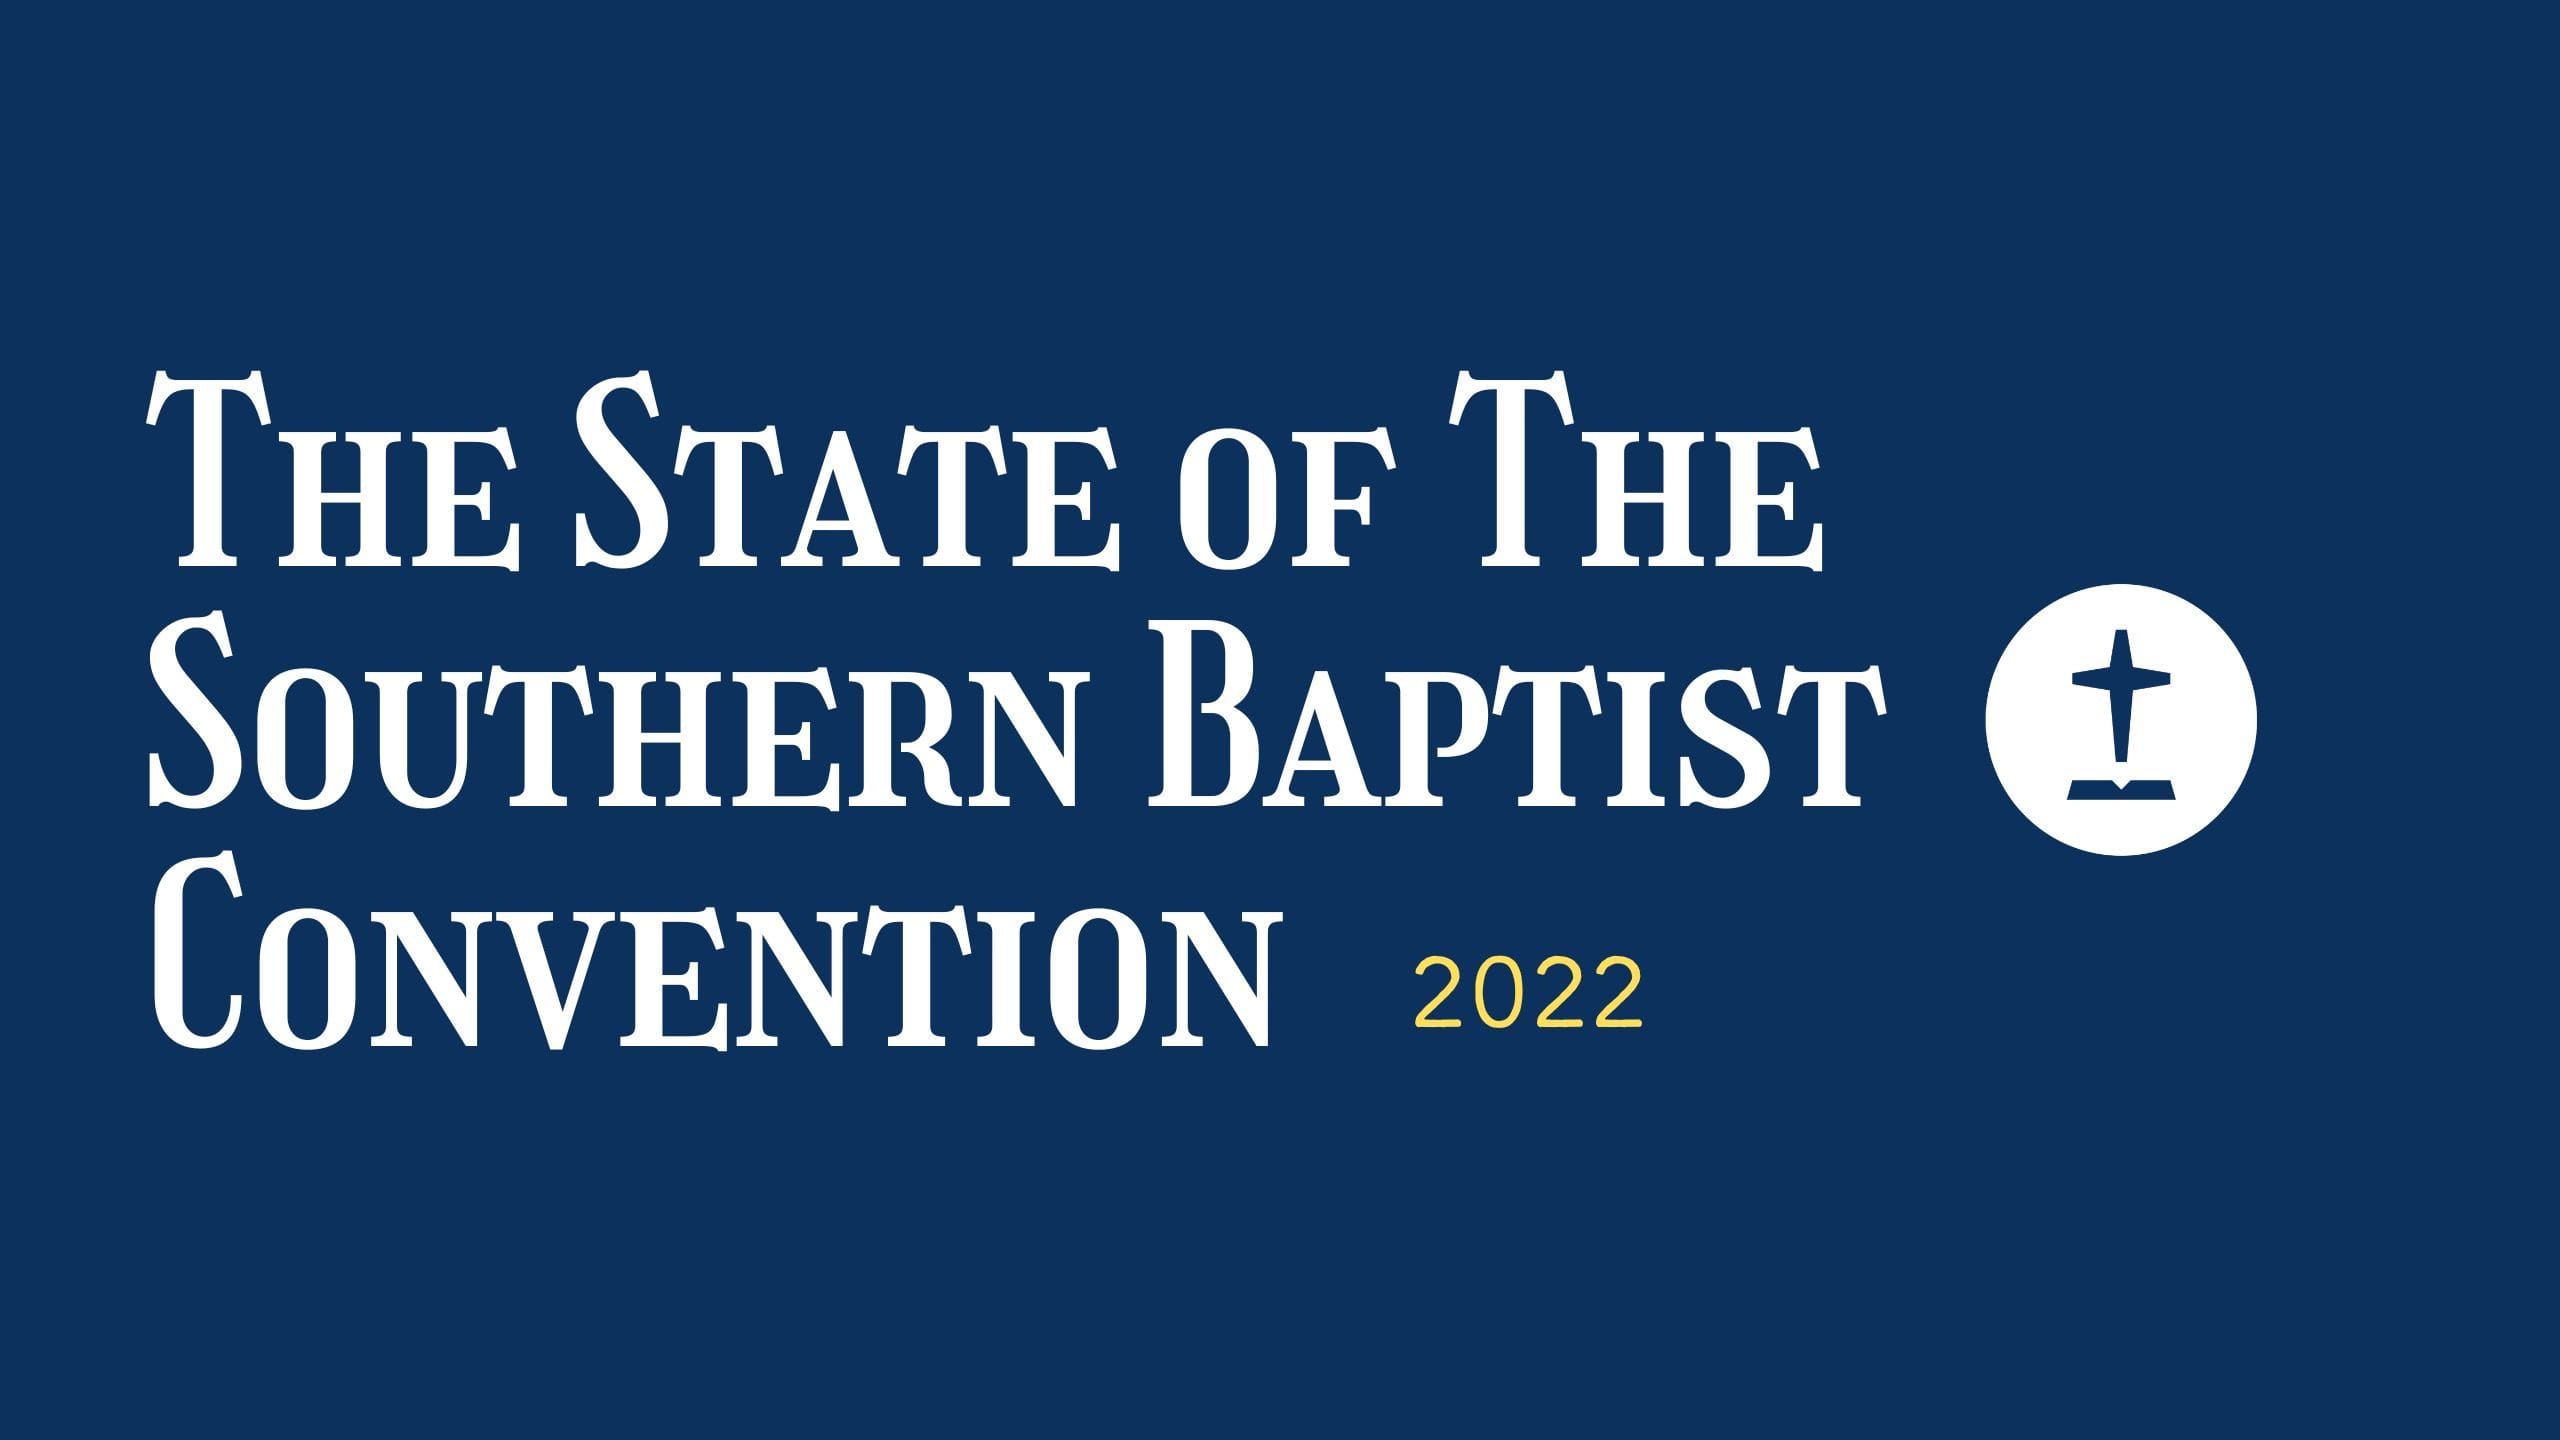 The State of the Southern Baptist Convention (2022)